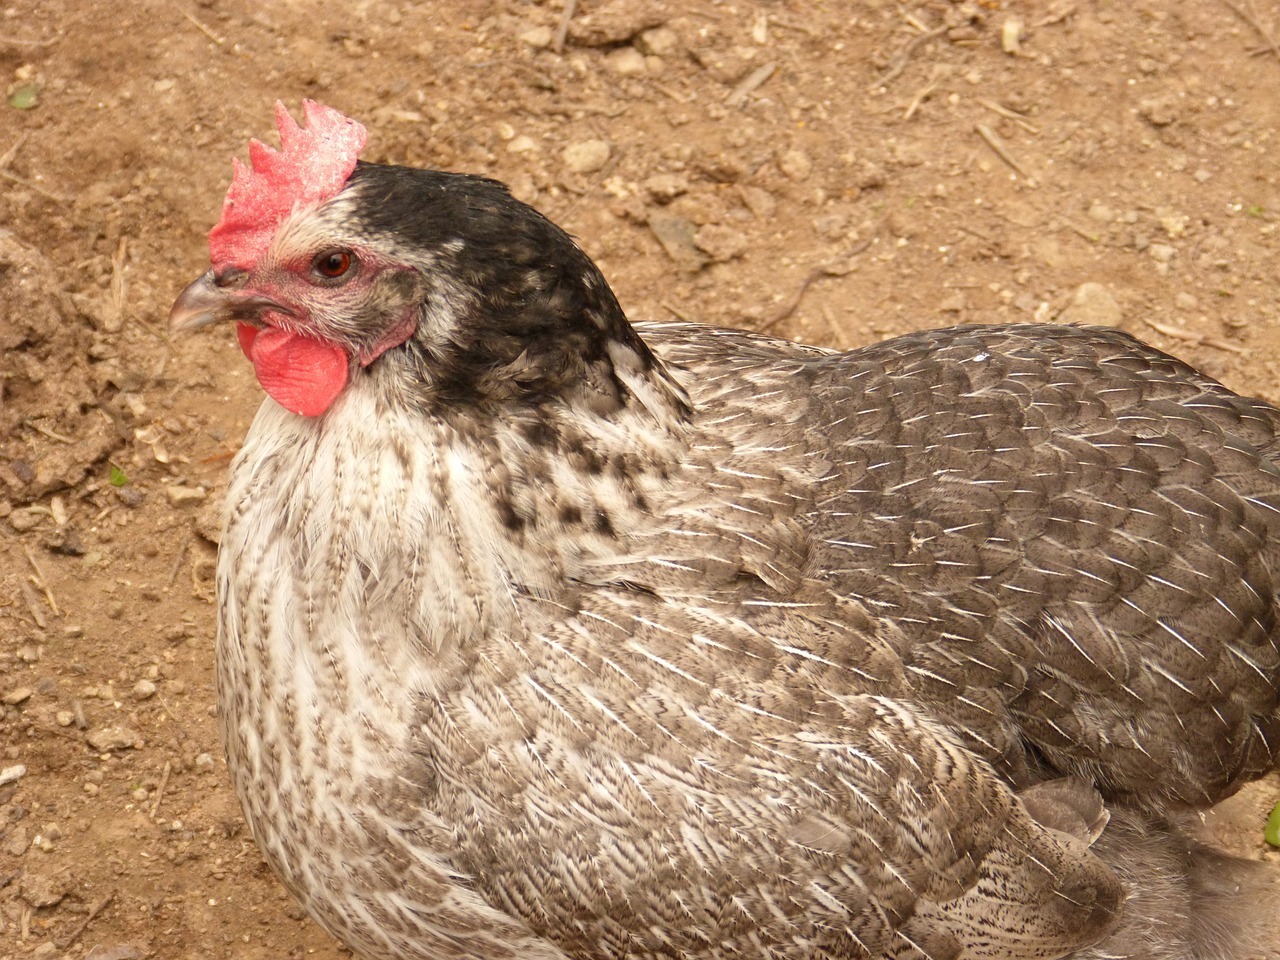 Avian Infectious Bronchitis Virus, commonly known as IBV, is a highly contagious viral infection that severely affects poultry, especially chickens, layers and turkeys.